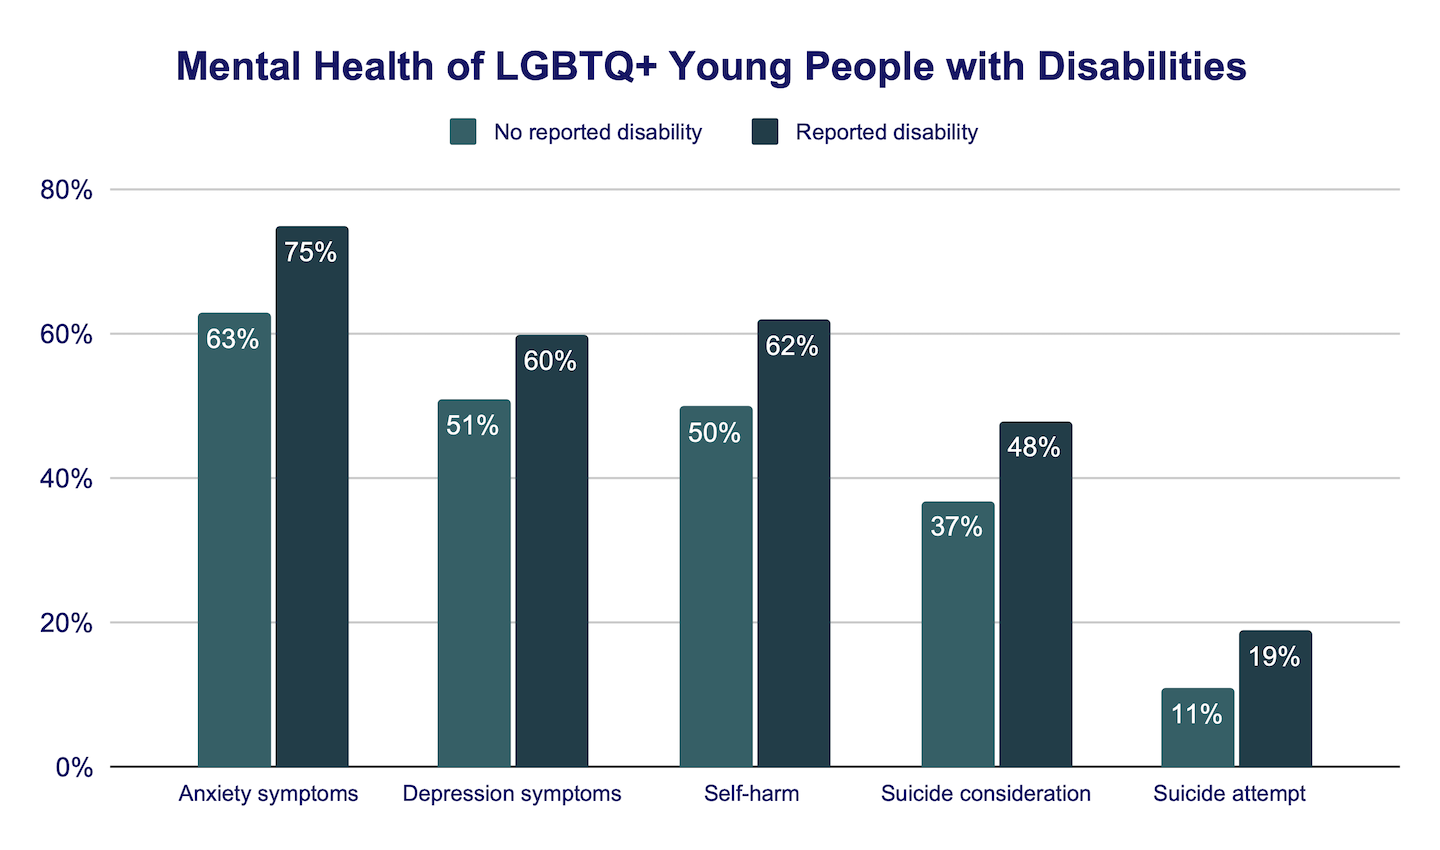 Mental Health of LGBTQ+ Young People with Disabilities